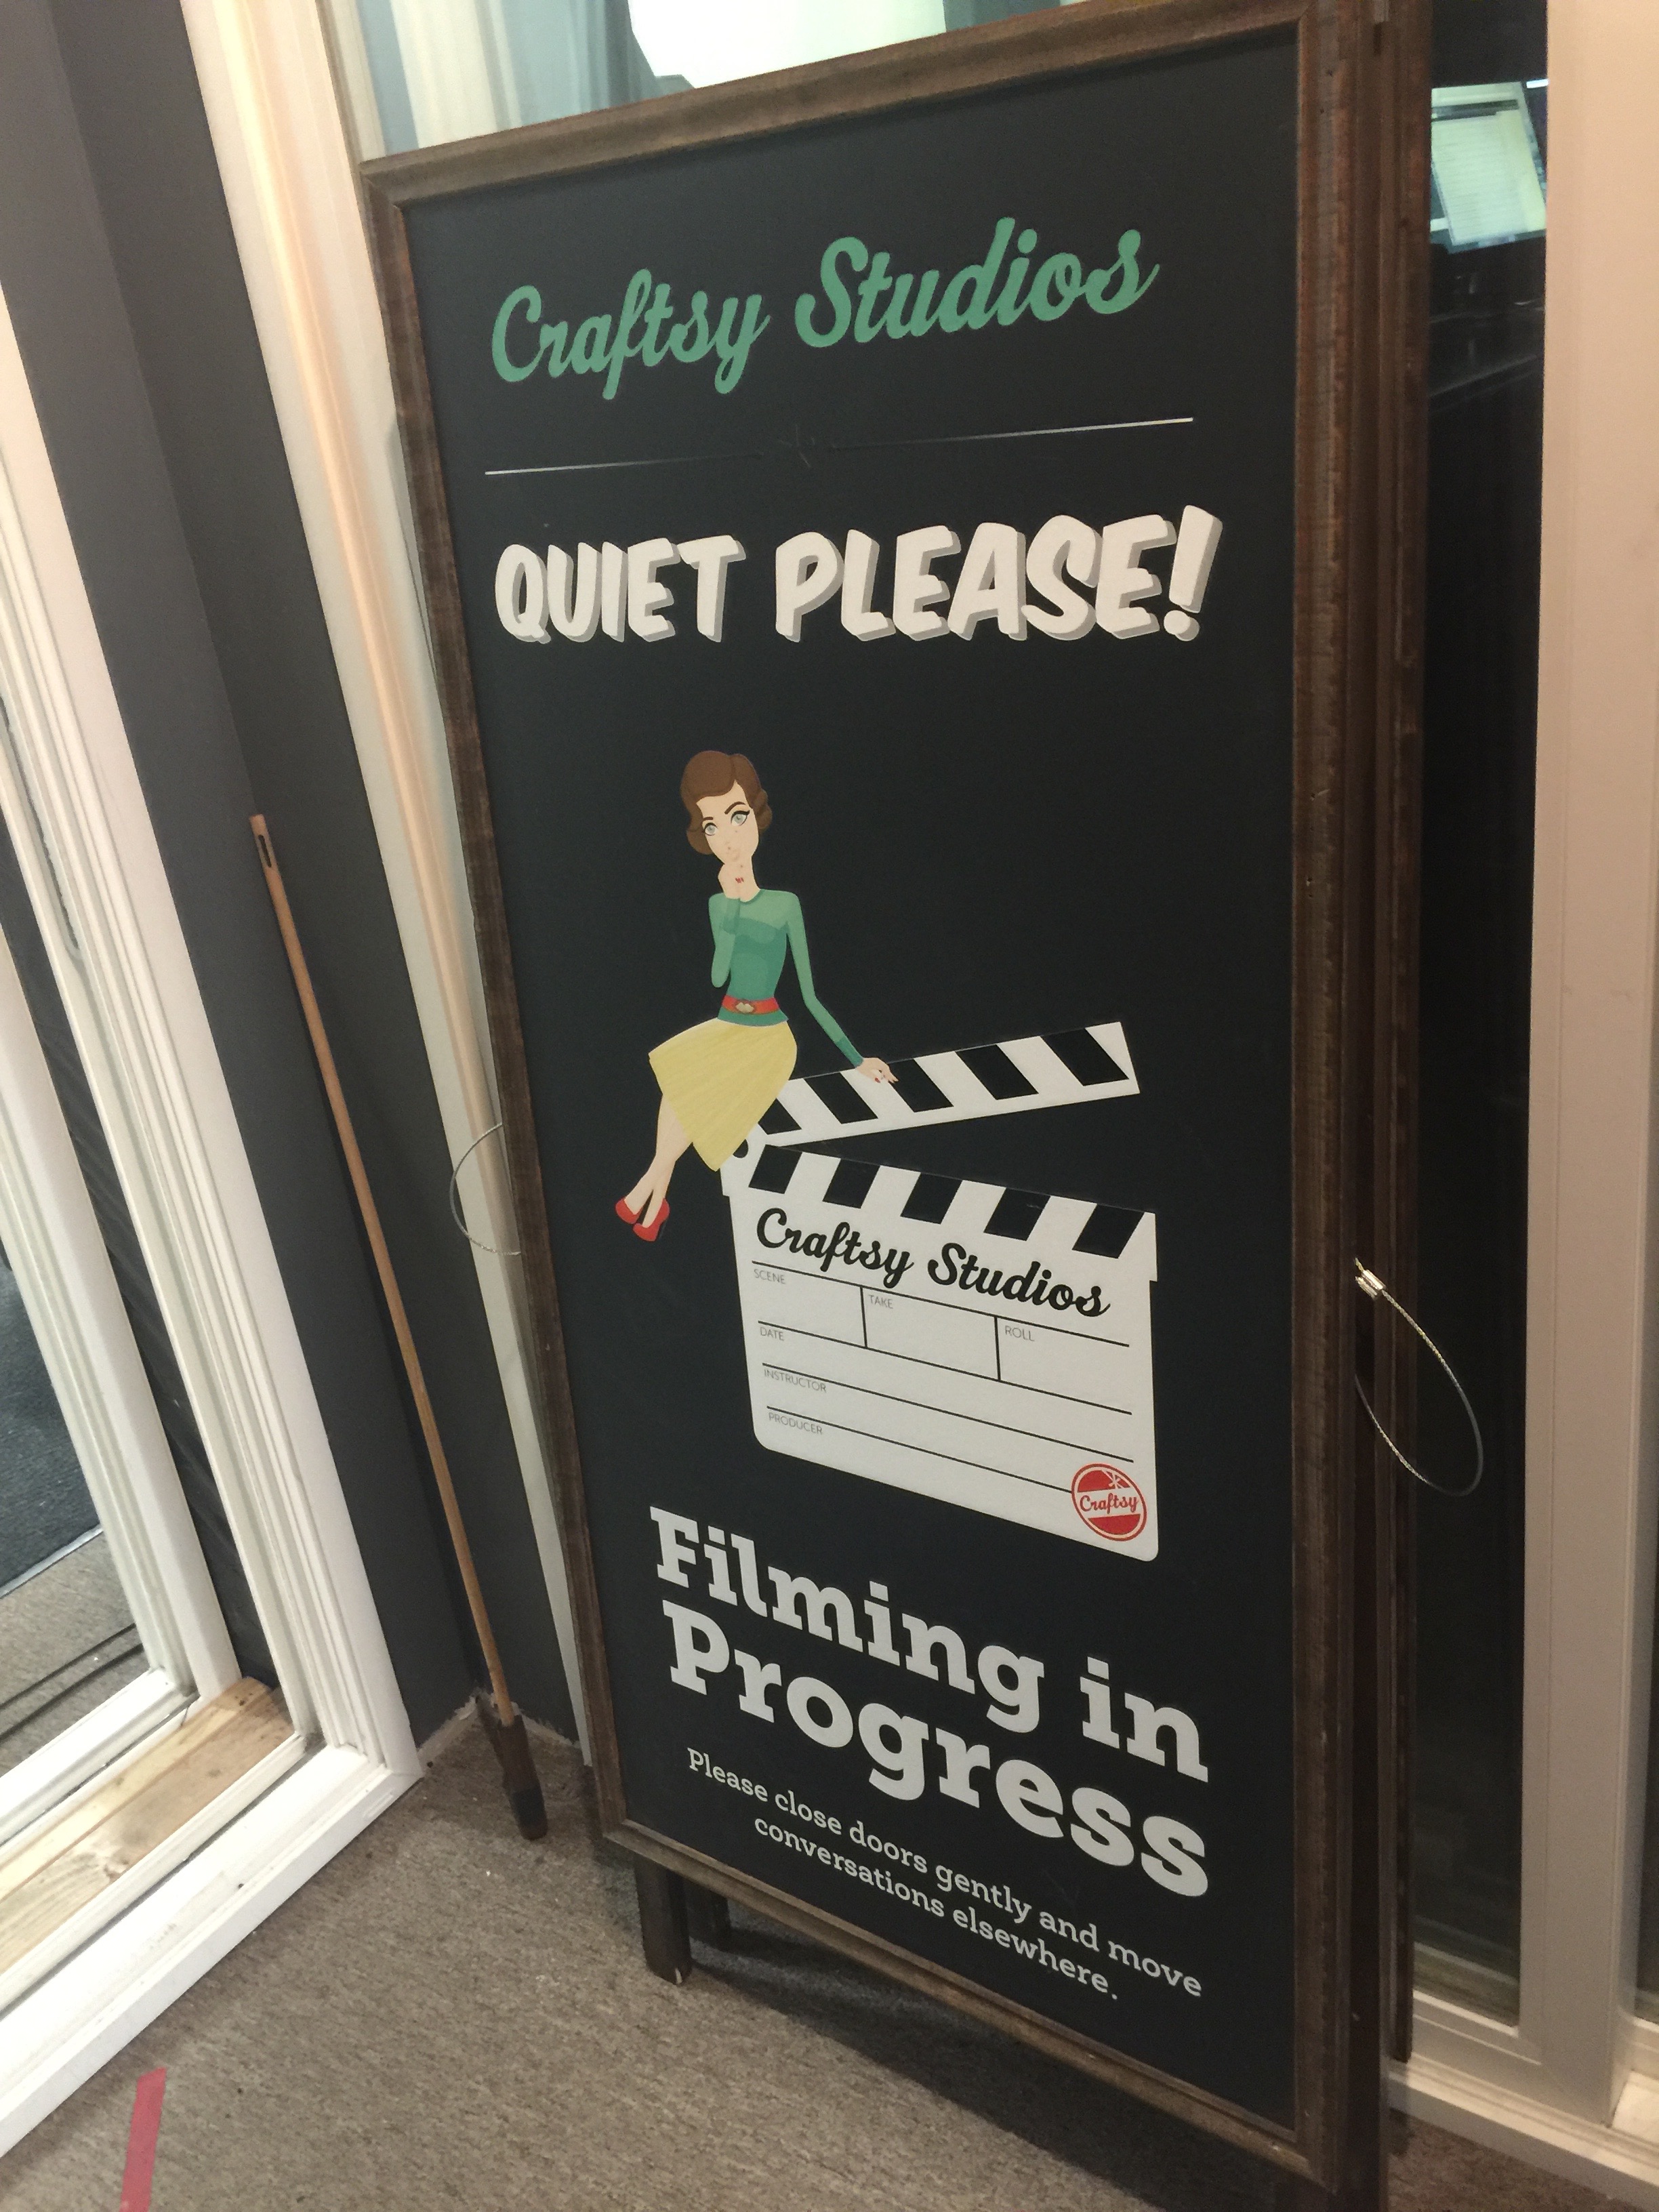 This cute sign was placed outside the studio we were filming in.